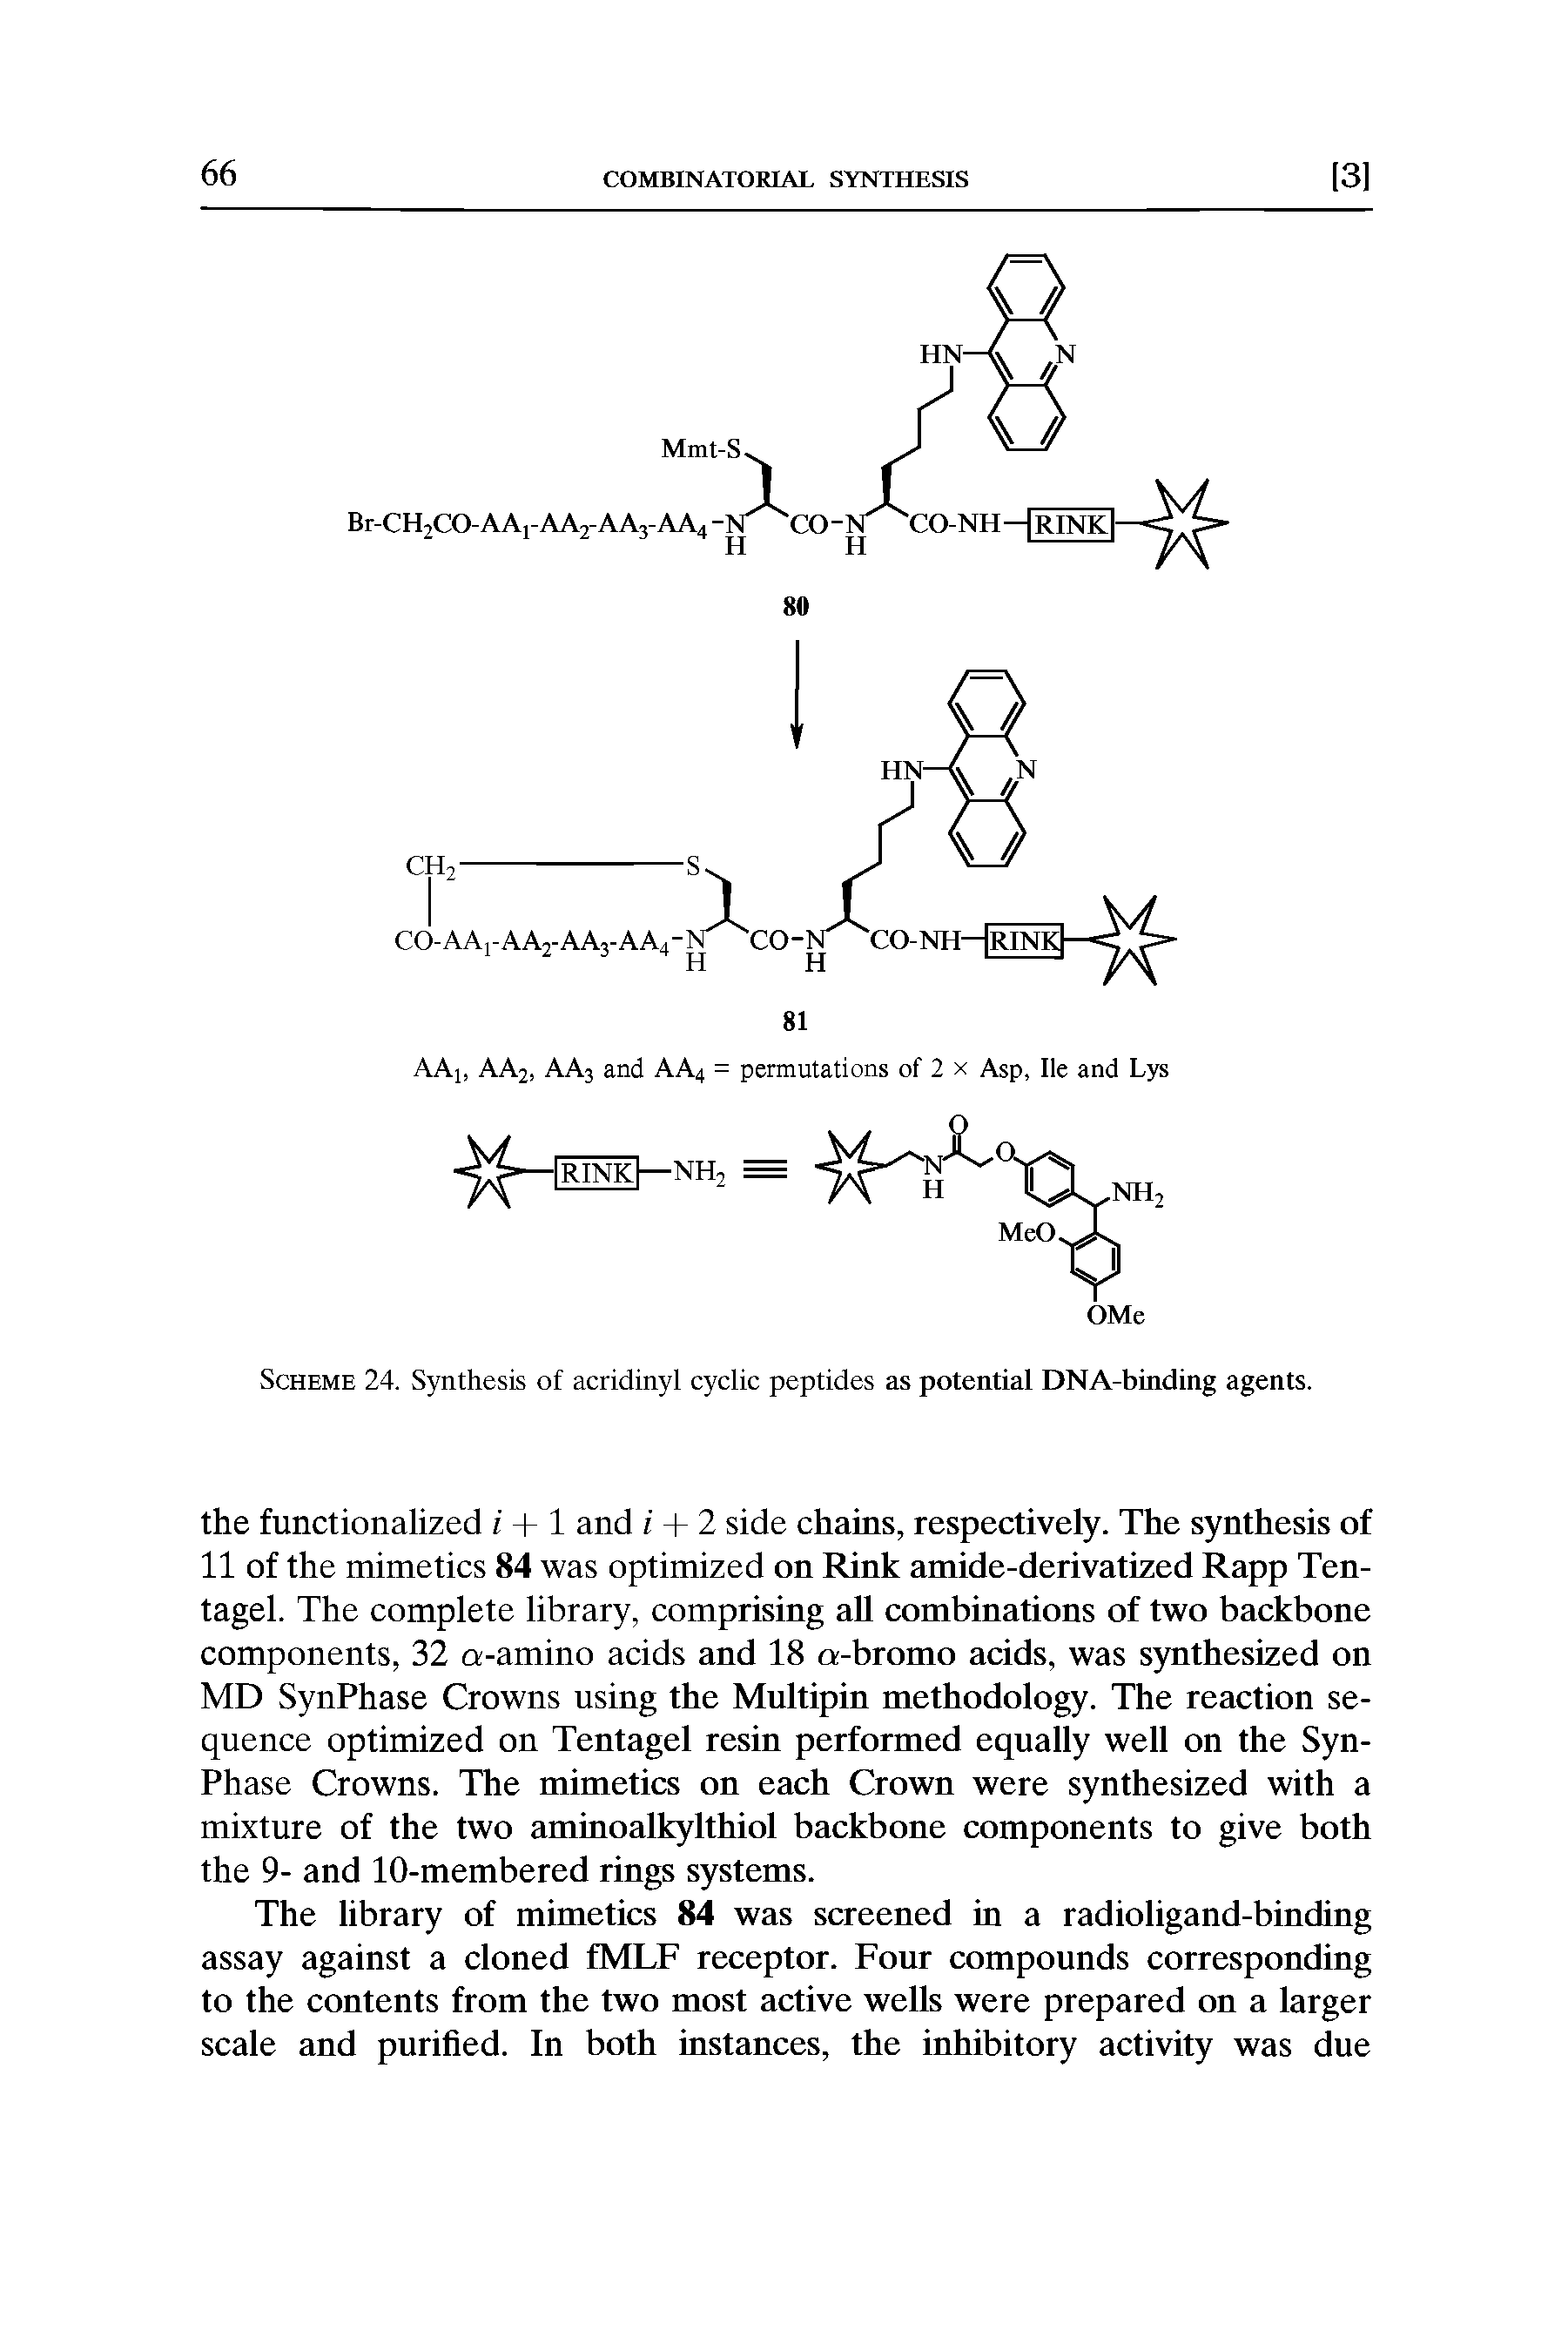 Scheme 24. Synthesis of acridinyl cyclic peptides as potential DNA-binding agents.